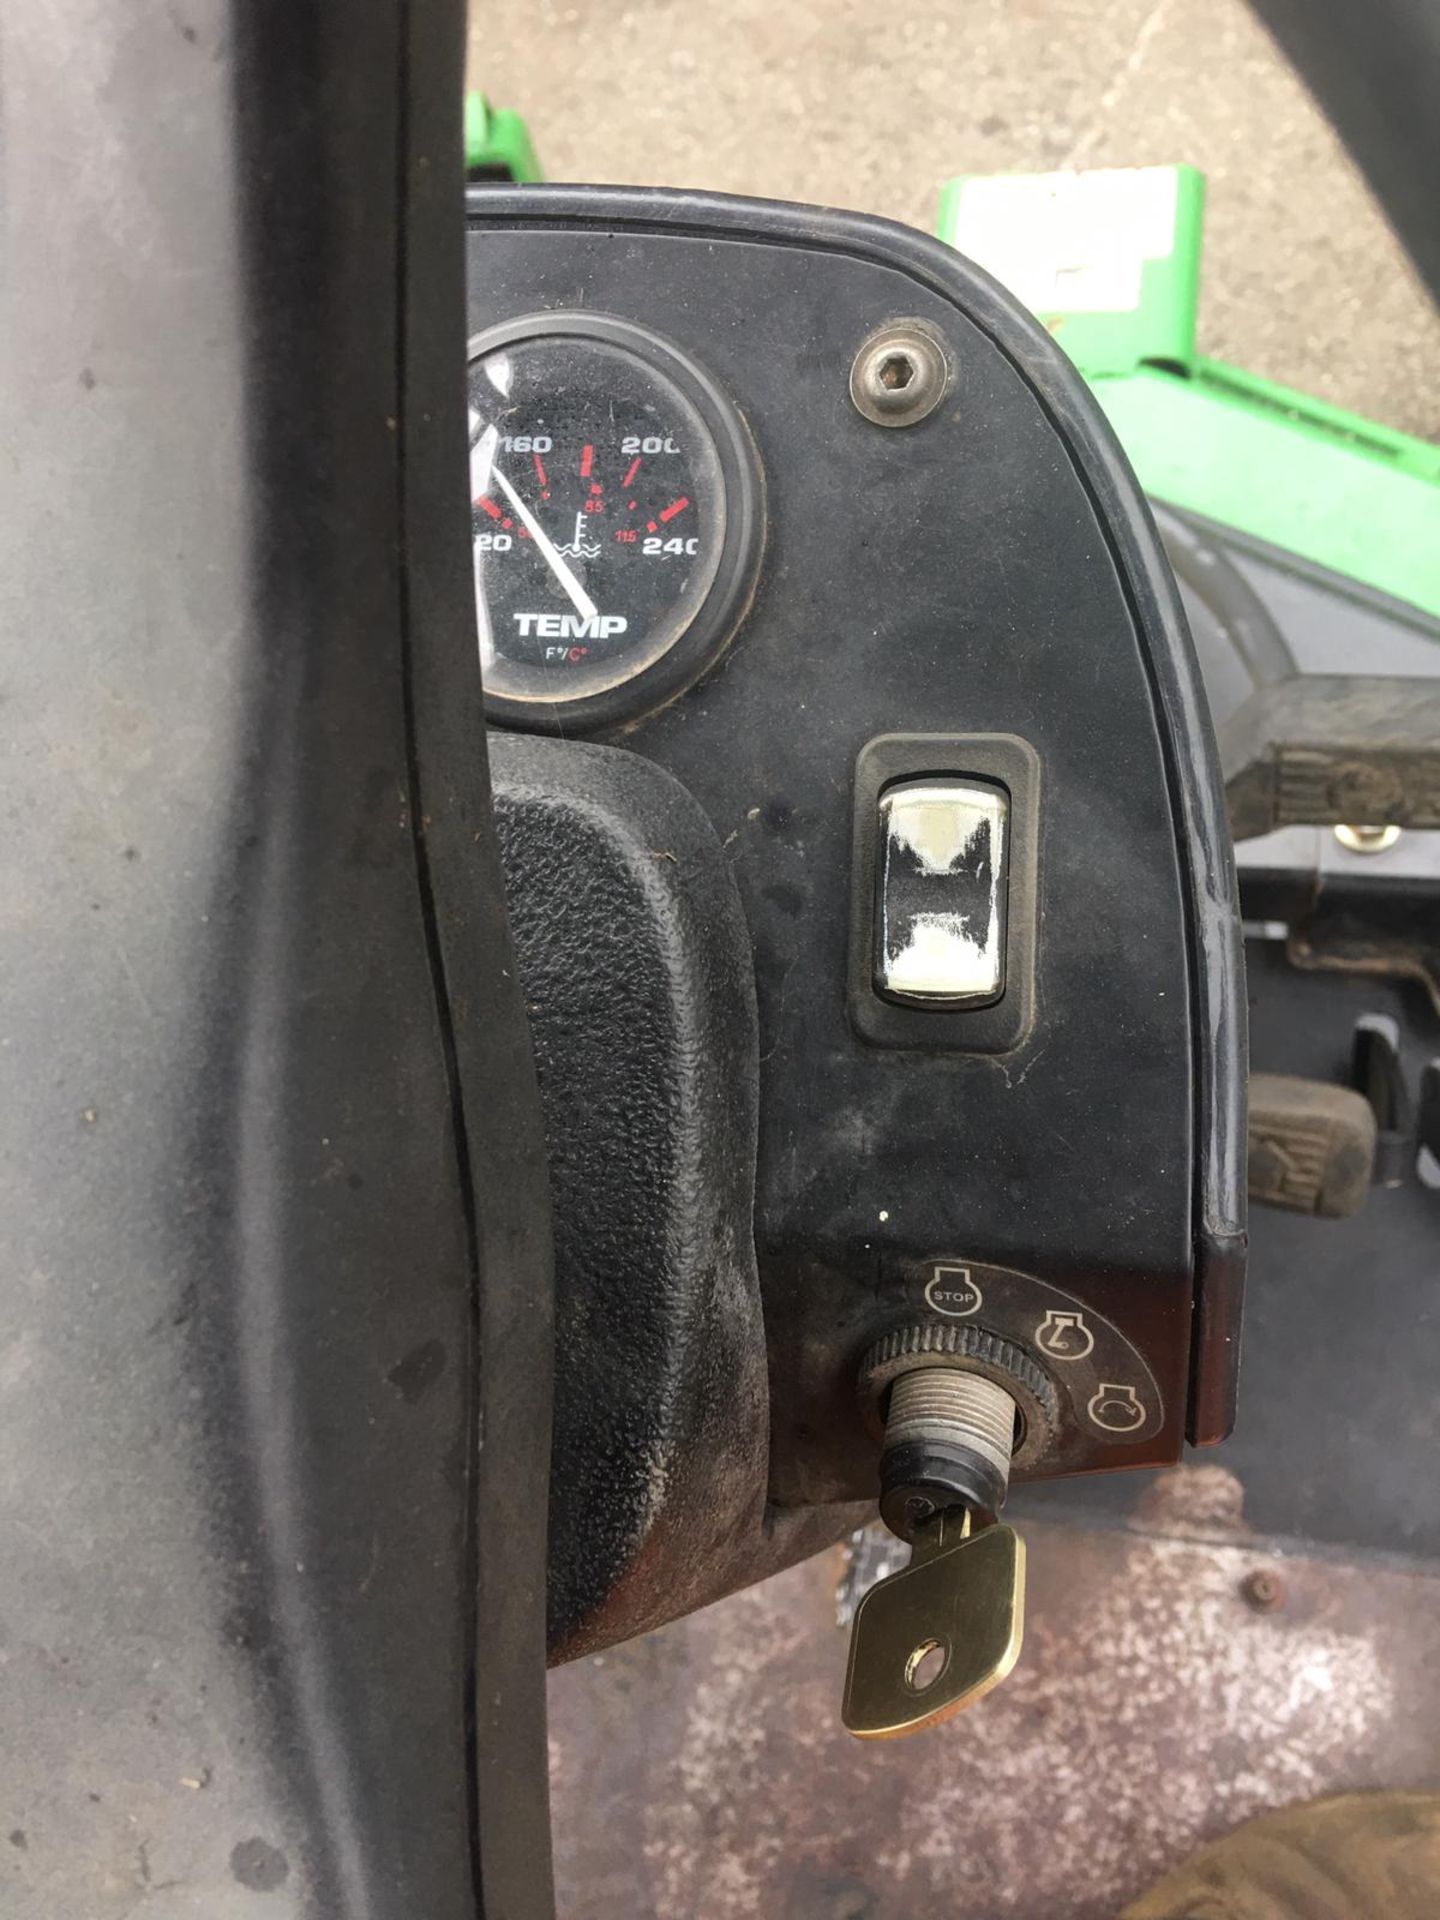 JOHN DEERE 1600 WIDE AREA TURBO BATWING RIDE ON LAWN MOWER, CRUISE CONTROL, RUNS & WORKS *NO VAT* - Image 14 of 24